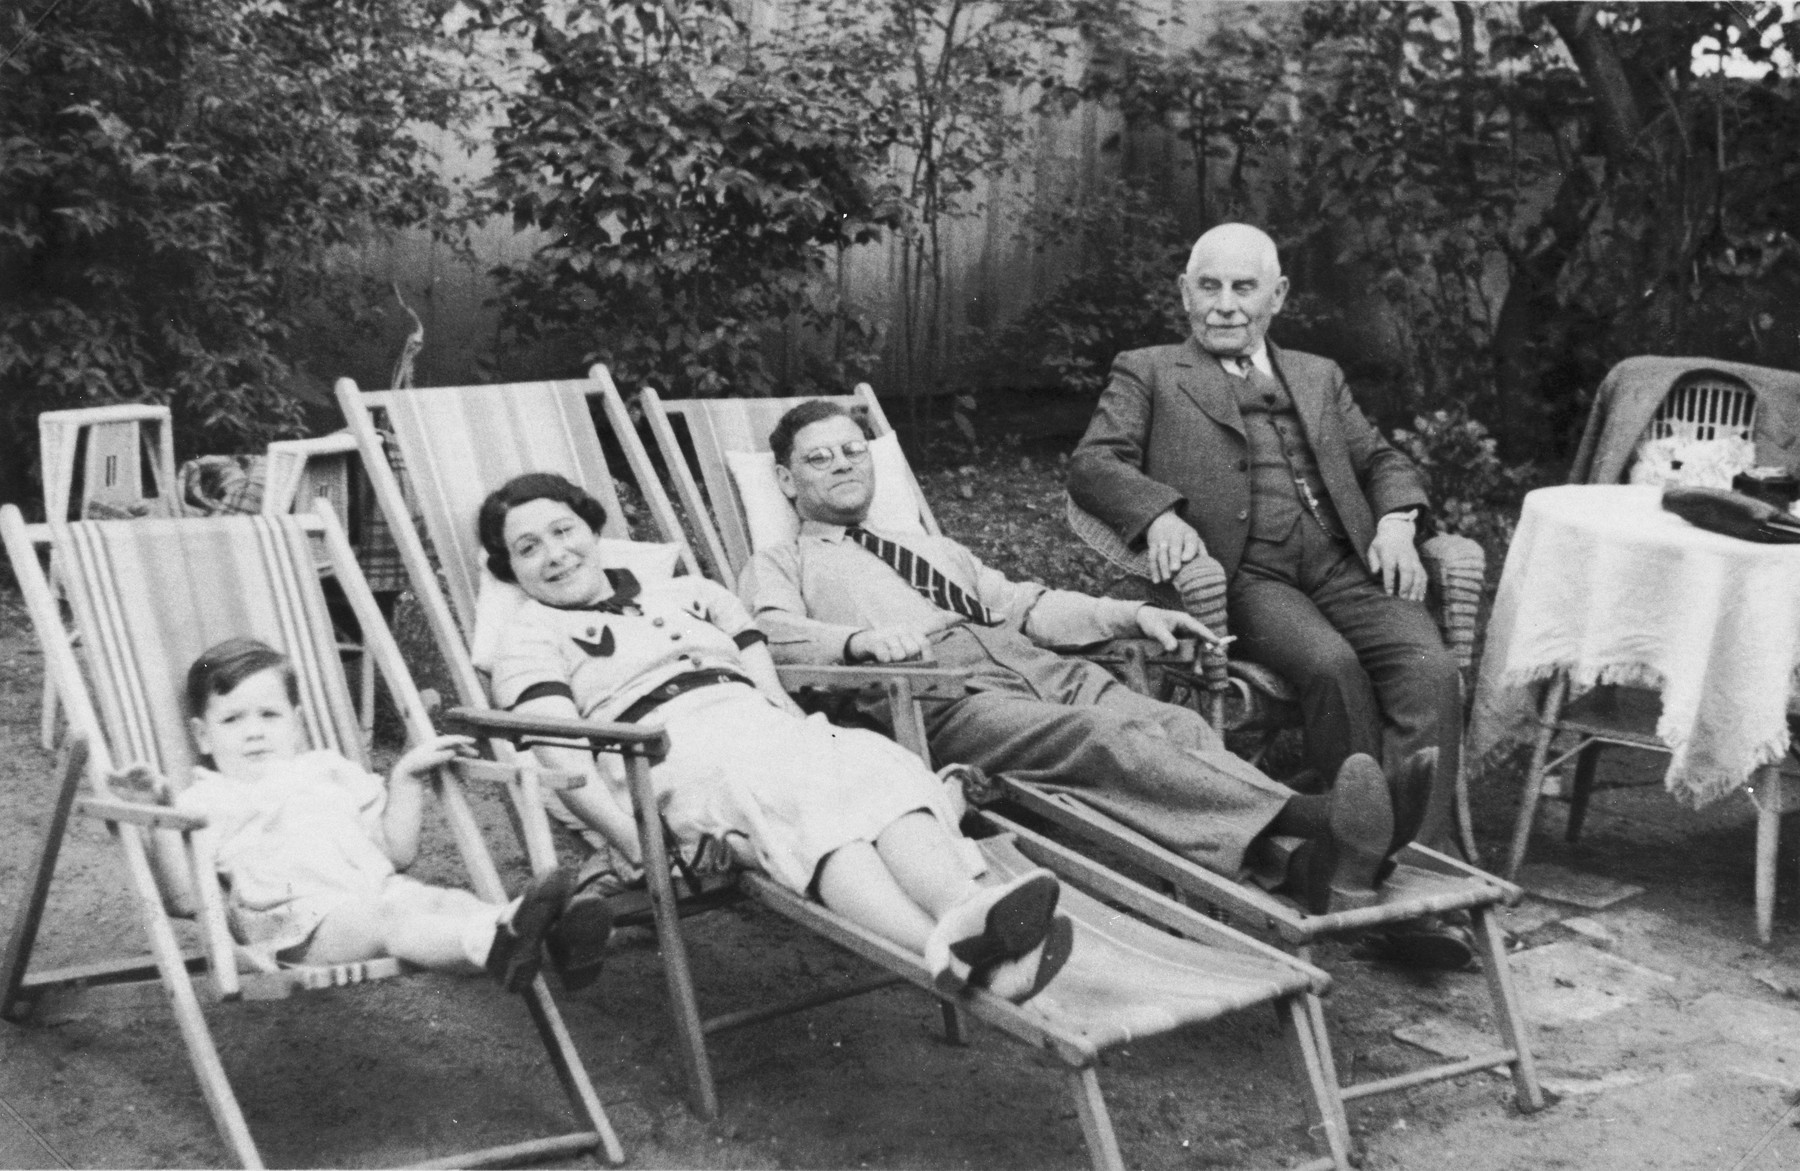 The Jacobsohn family relaxes outside on lawn chairs.

Pictured from left to right are: Rudolf, Margaret and Erich Jacobsohn and Erich's father, George Jacobsohn.